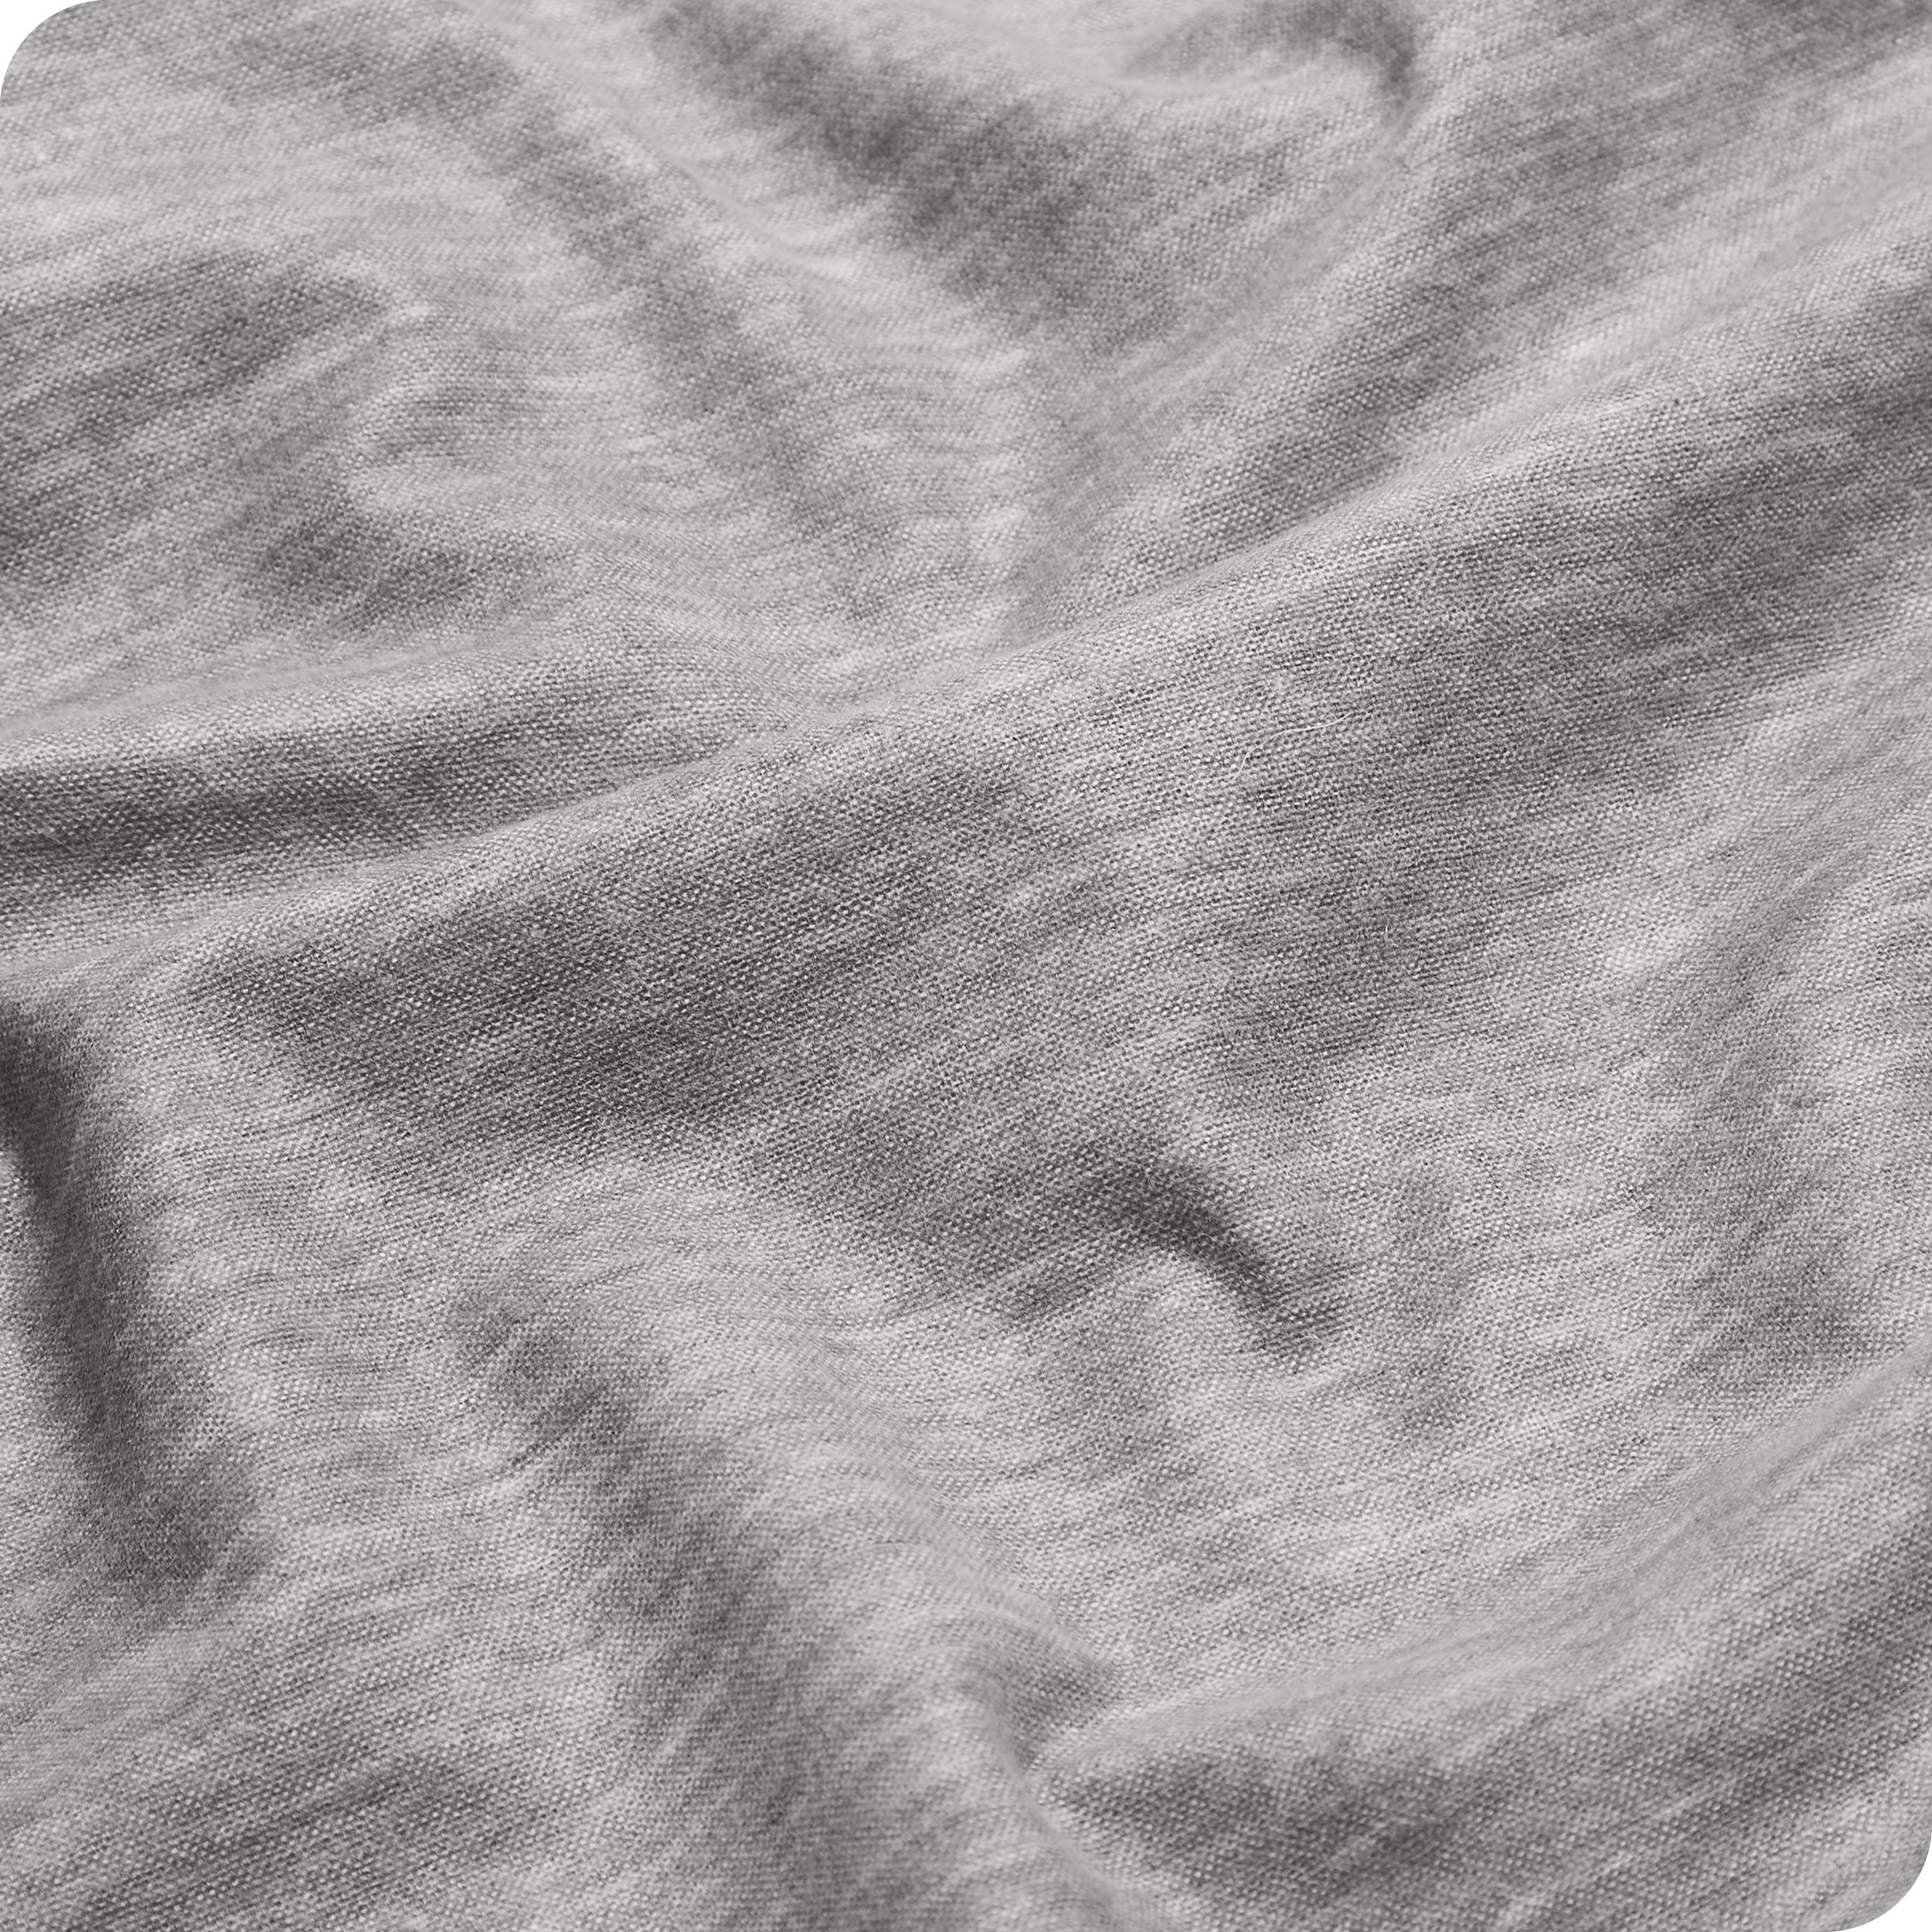 A close up view of a flannel sheet showing the texture.